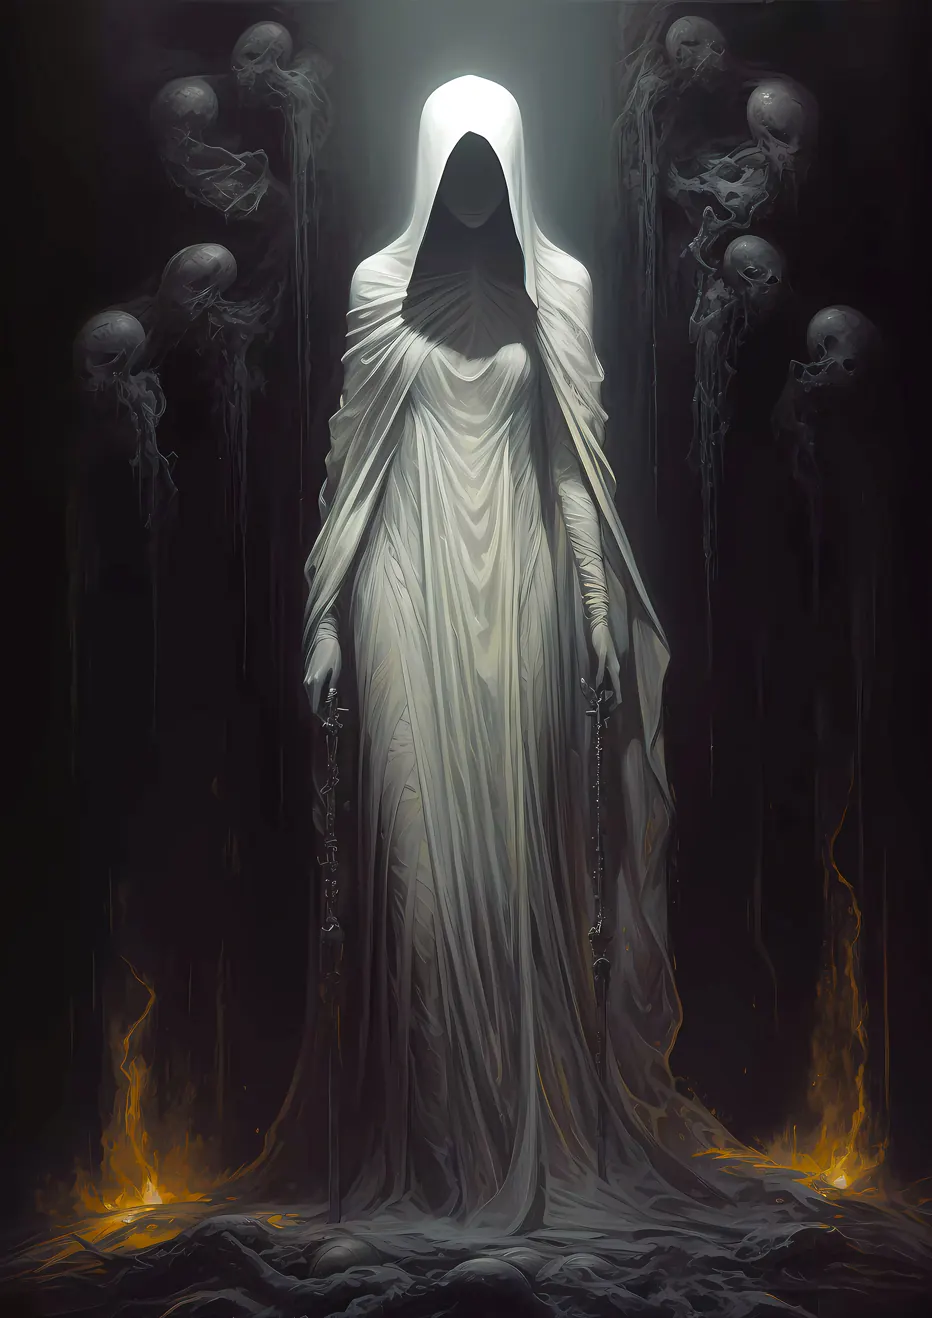 "Bound by Shadows" - A girl in a white hooded dress holds chains amid skeletal shapes and flickering fires.